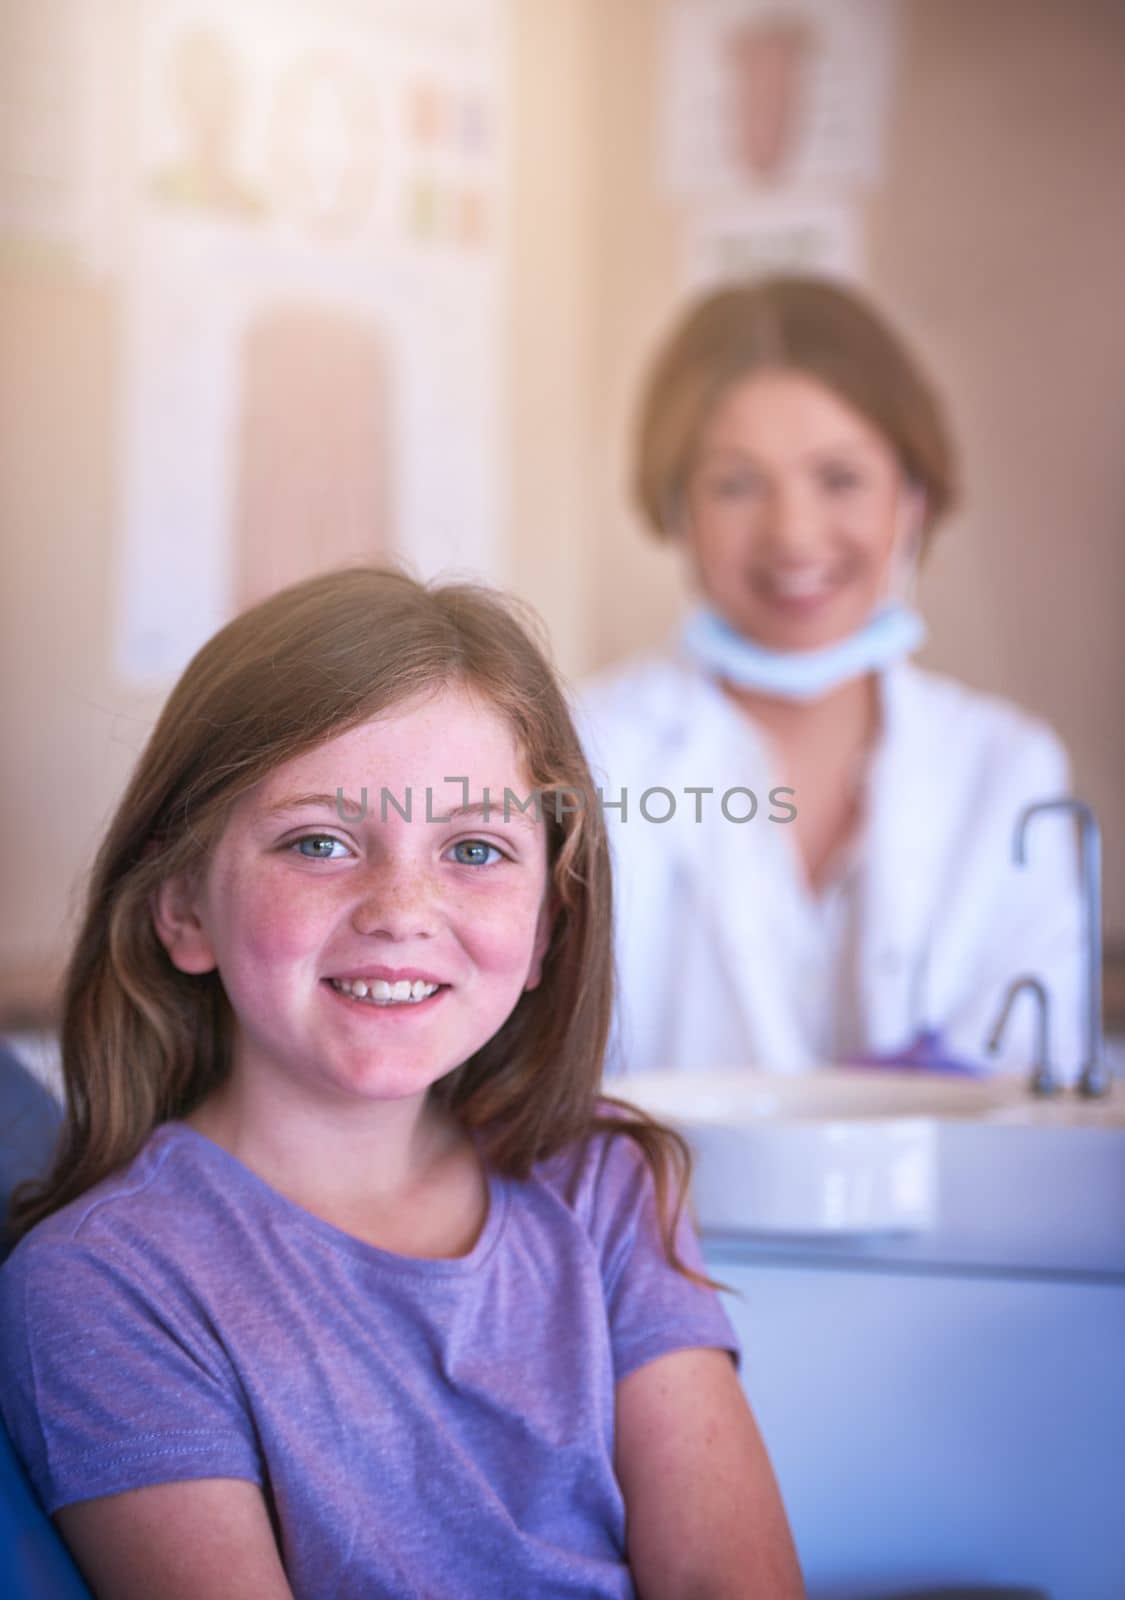 I enjoy my dentist visits, I dont need bribery. a little girl at the dentist for a checkup